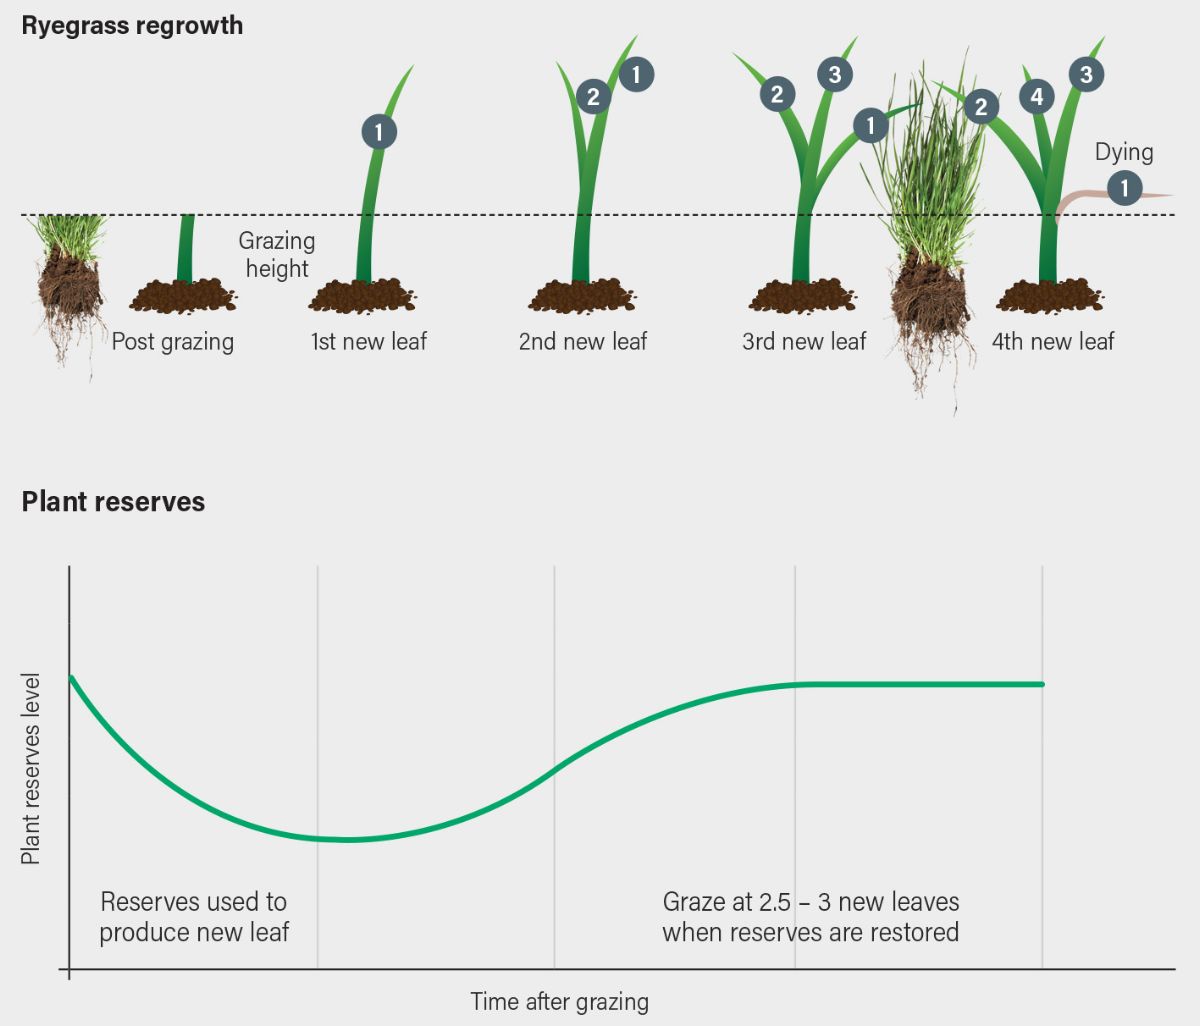 Image showing ryegrass regrowth and plant reserve stages